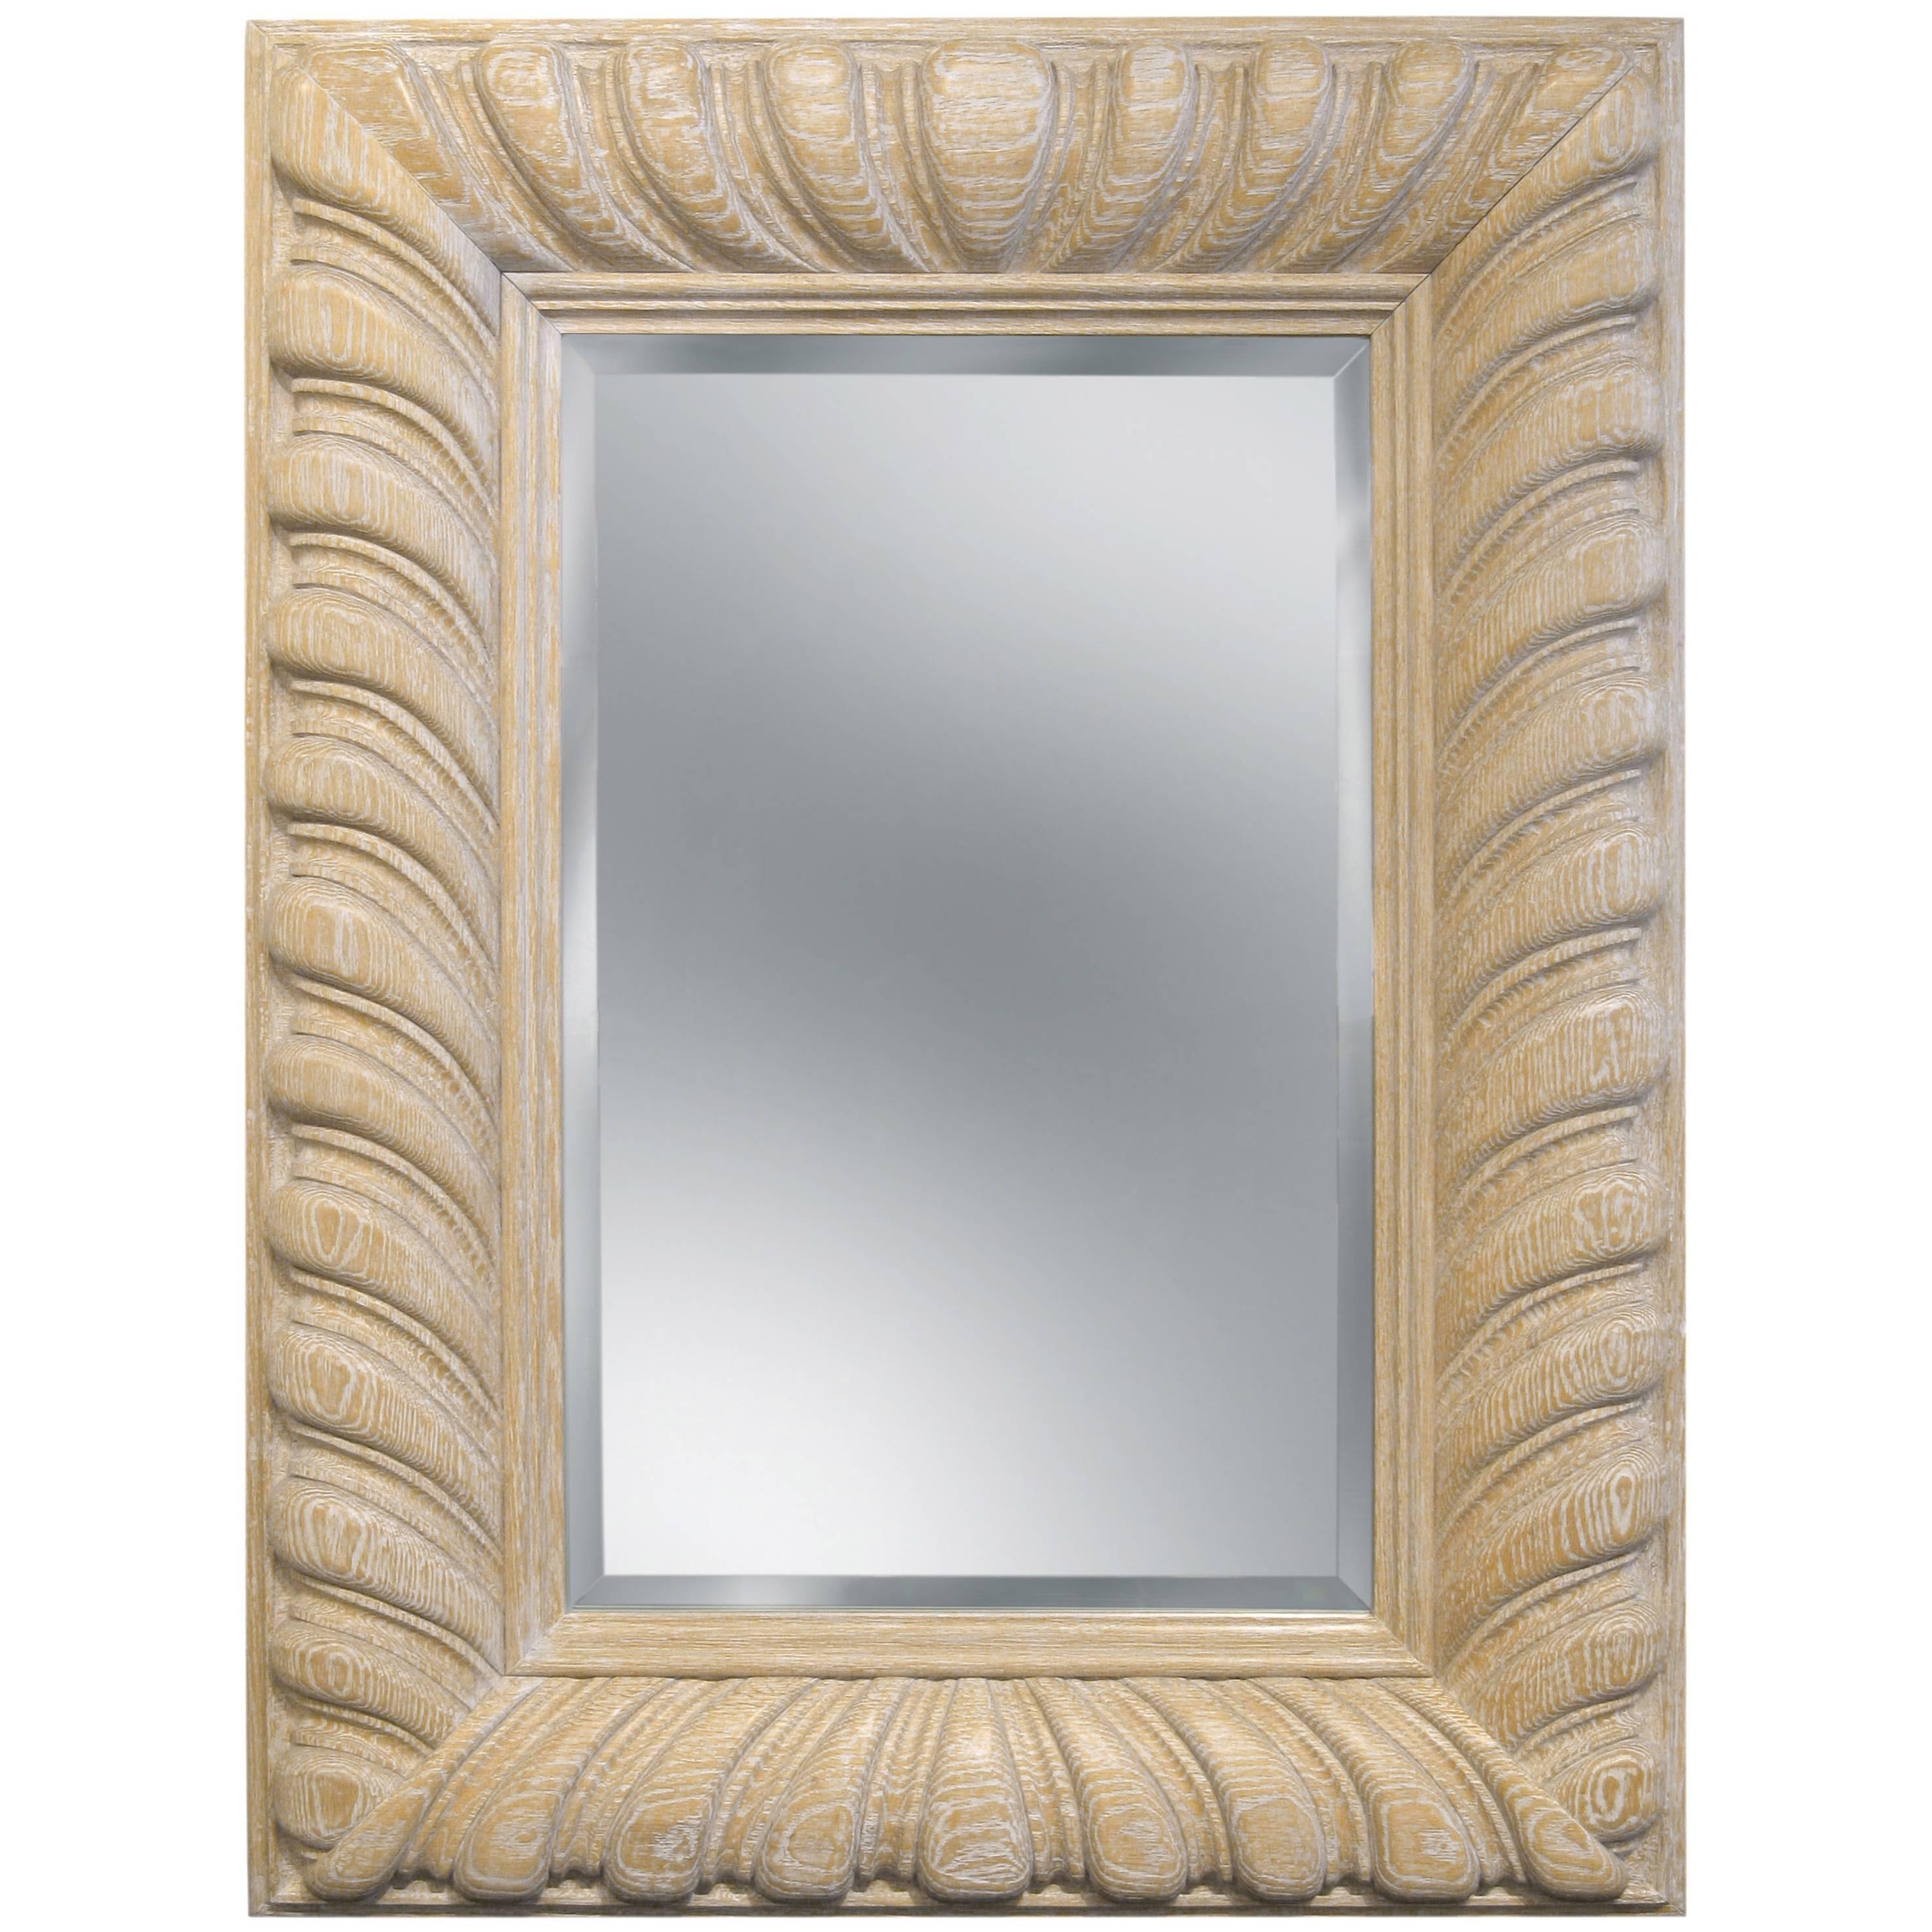 Luten-Clarey-Stern Large "Bolton Carved Mirror" in White Rubbed Oak 1980s For Sale